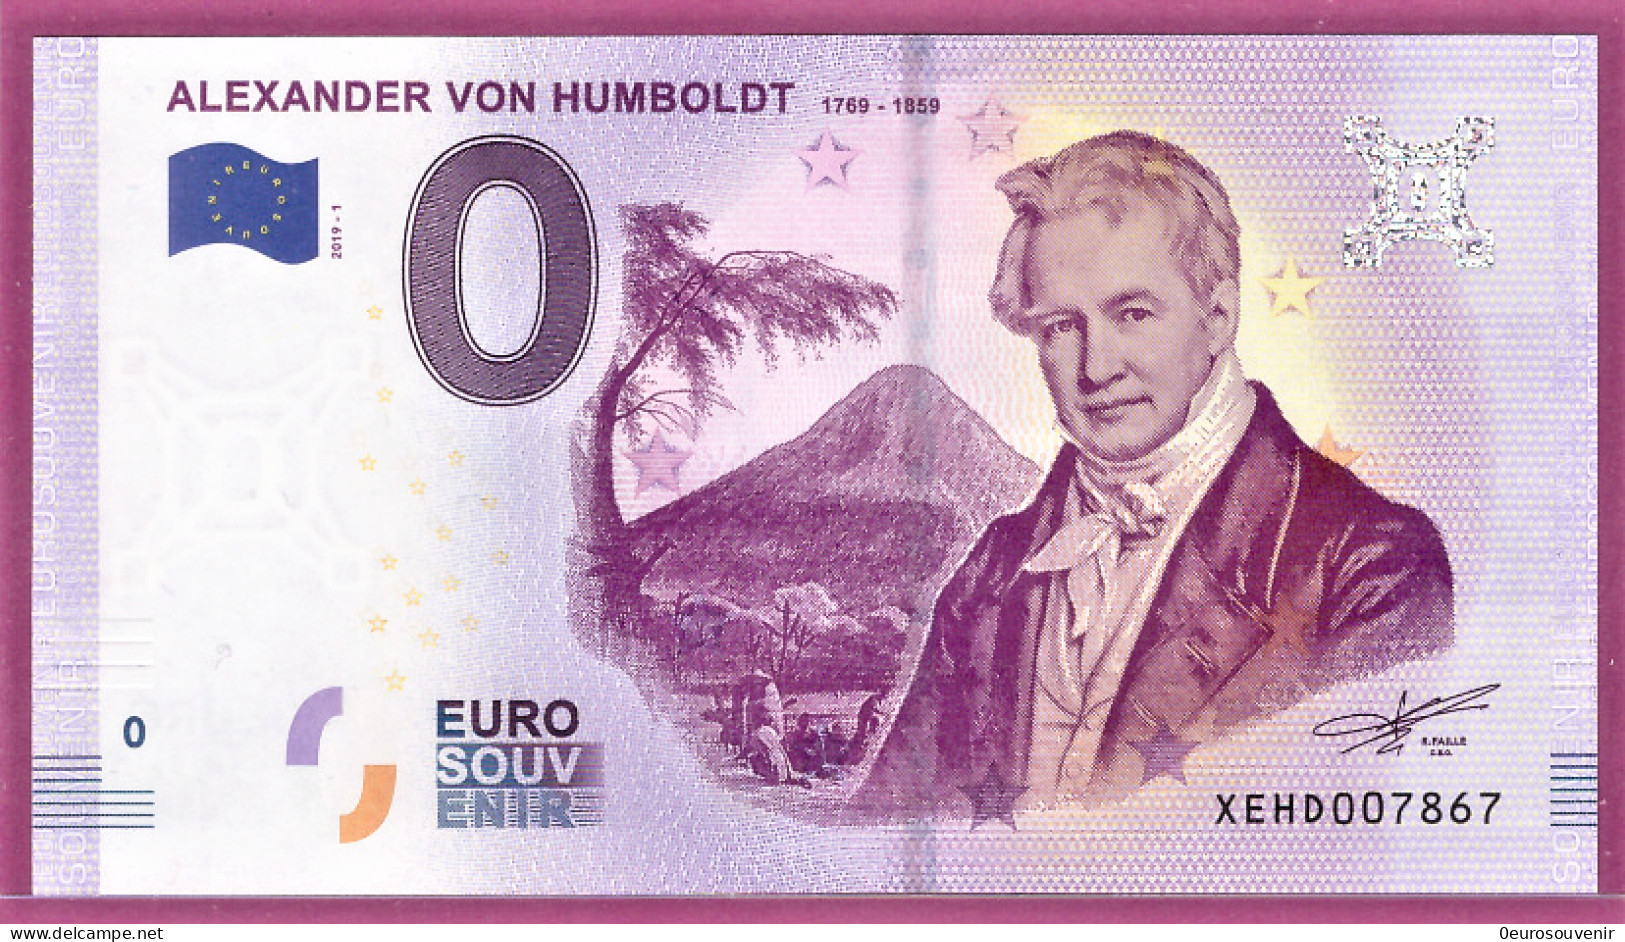 0-Euro XEHD 2019-1 ALEXANDER VON HUMBOLDT - 1769 - 1859 - Private Proofs / Unofficial